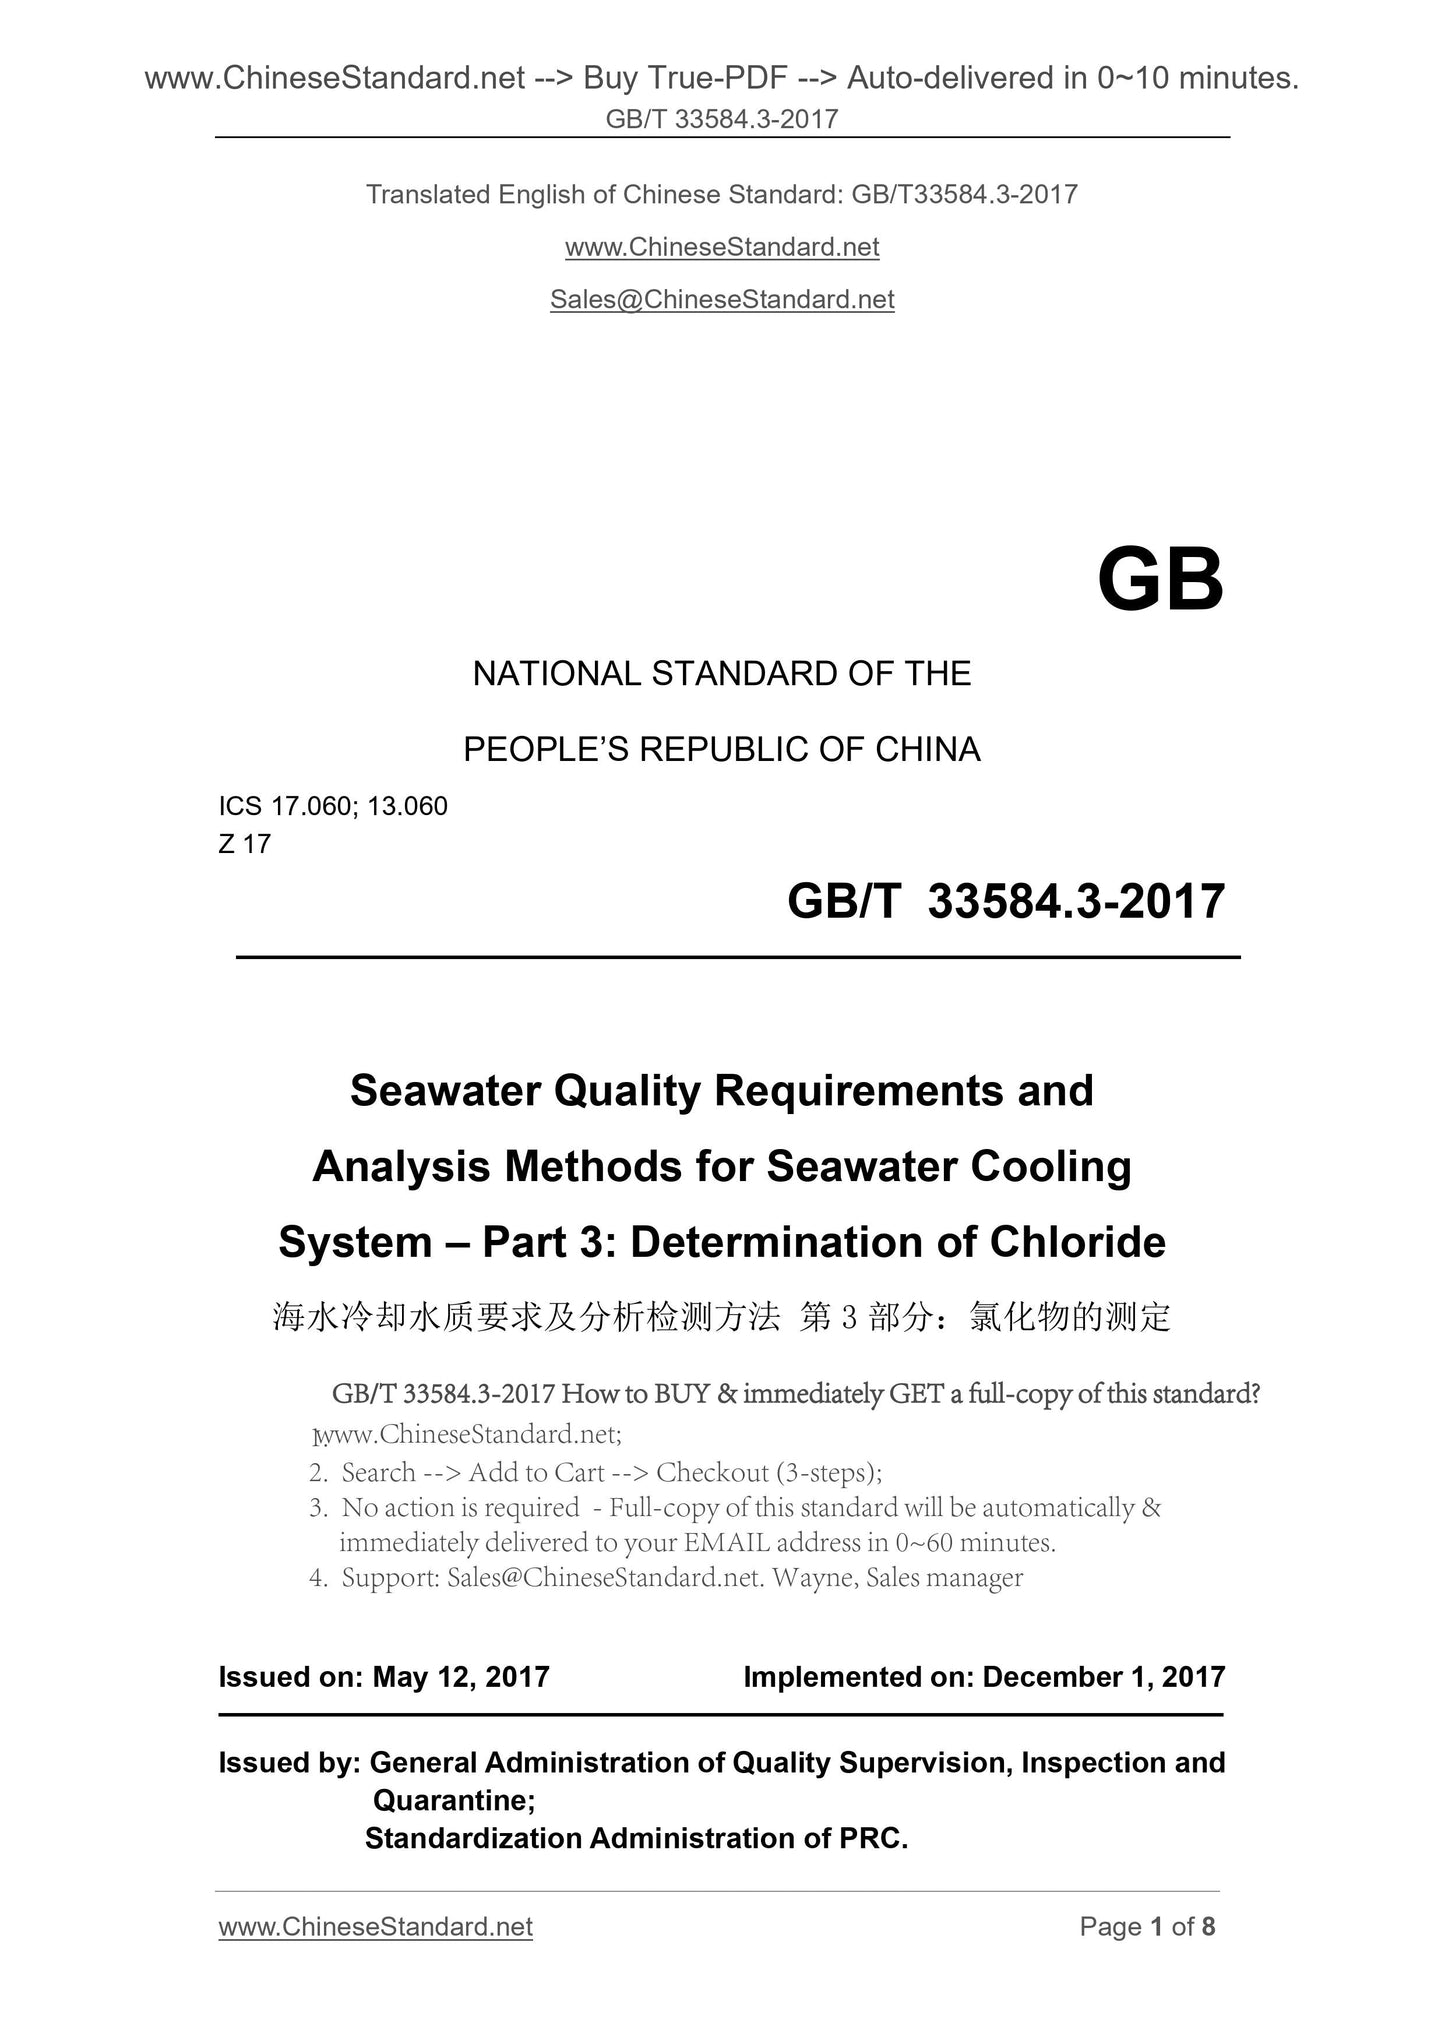 GB/T 33584.3-2017 Page 1